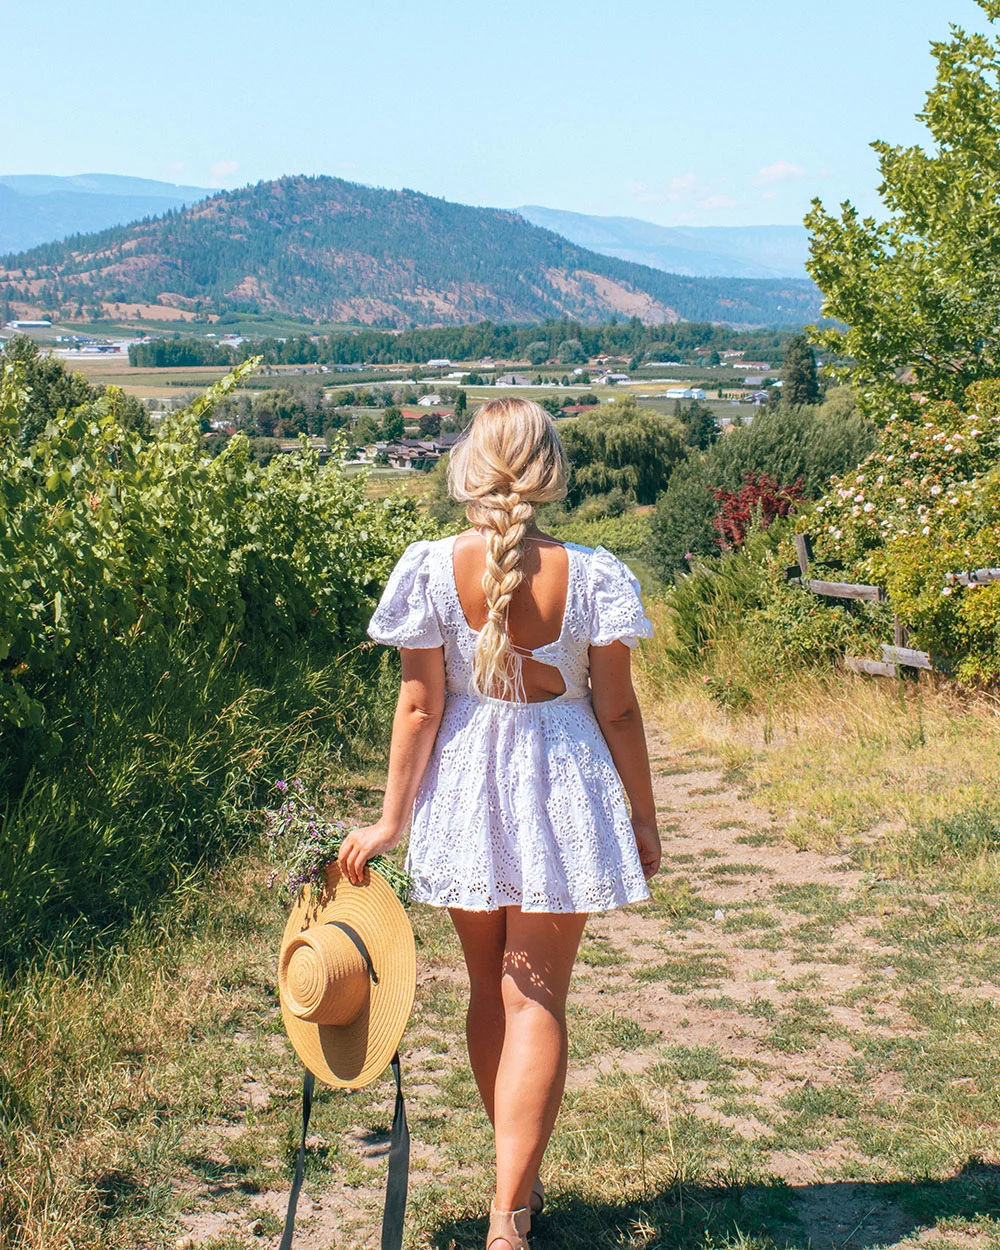 Looking for the best wineries in Kelowna for lunch? This guide is for you! Here's a list of the best Kelowna wineries with restaurants to enjoy an amazing lunch with wine in the sun. Pictured here: Ancient Hill Winery